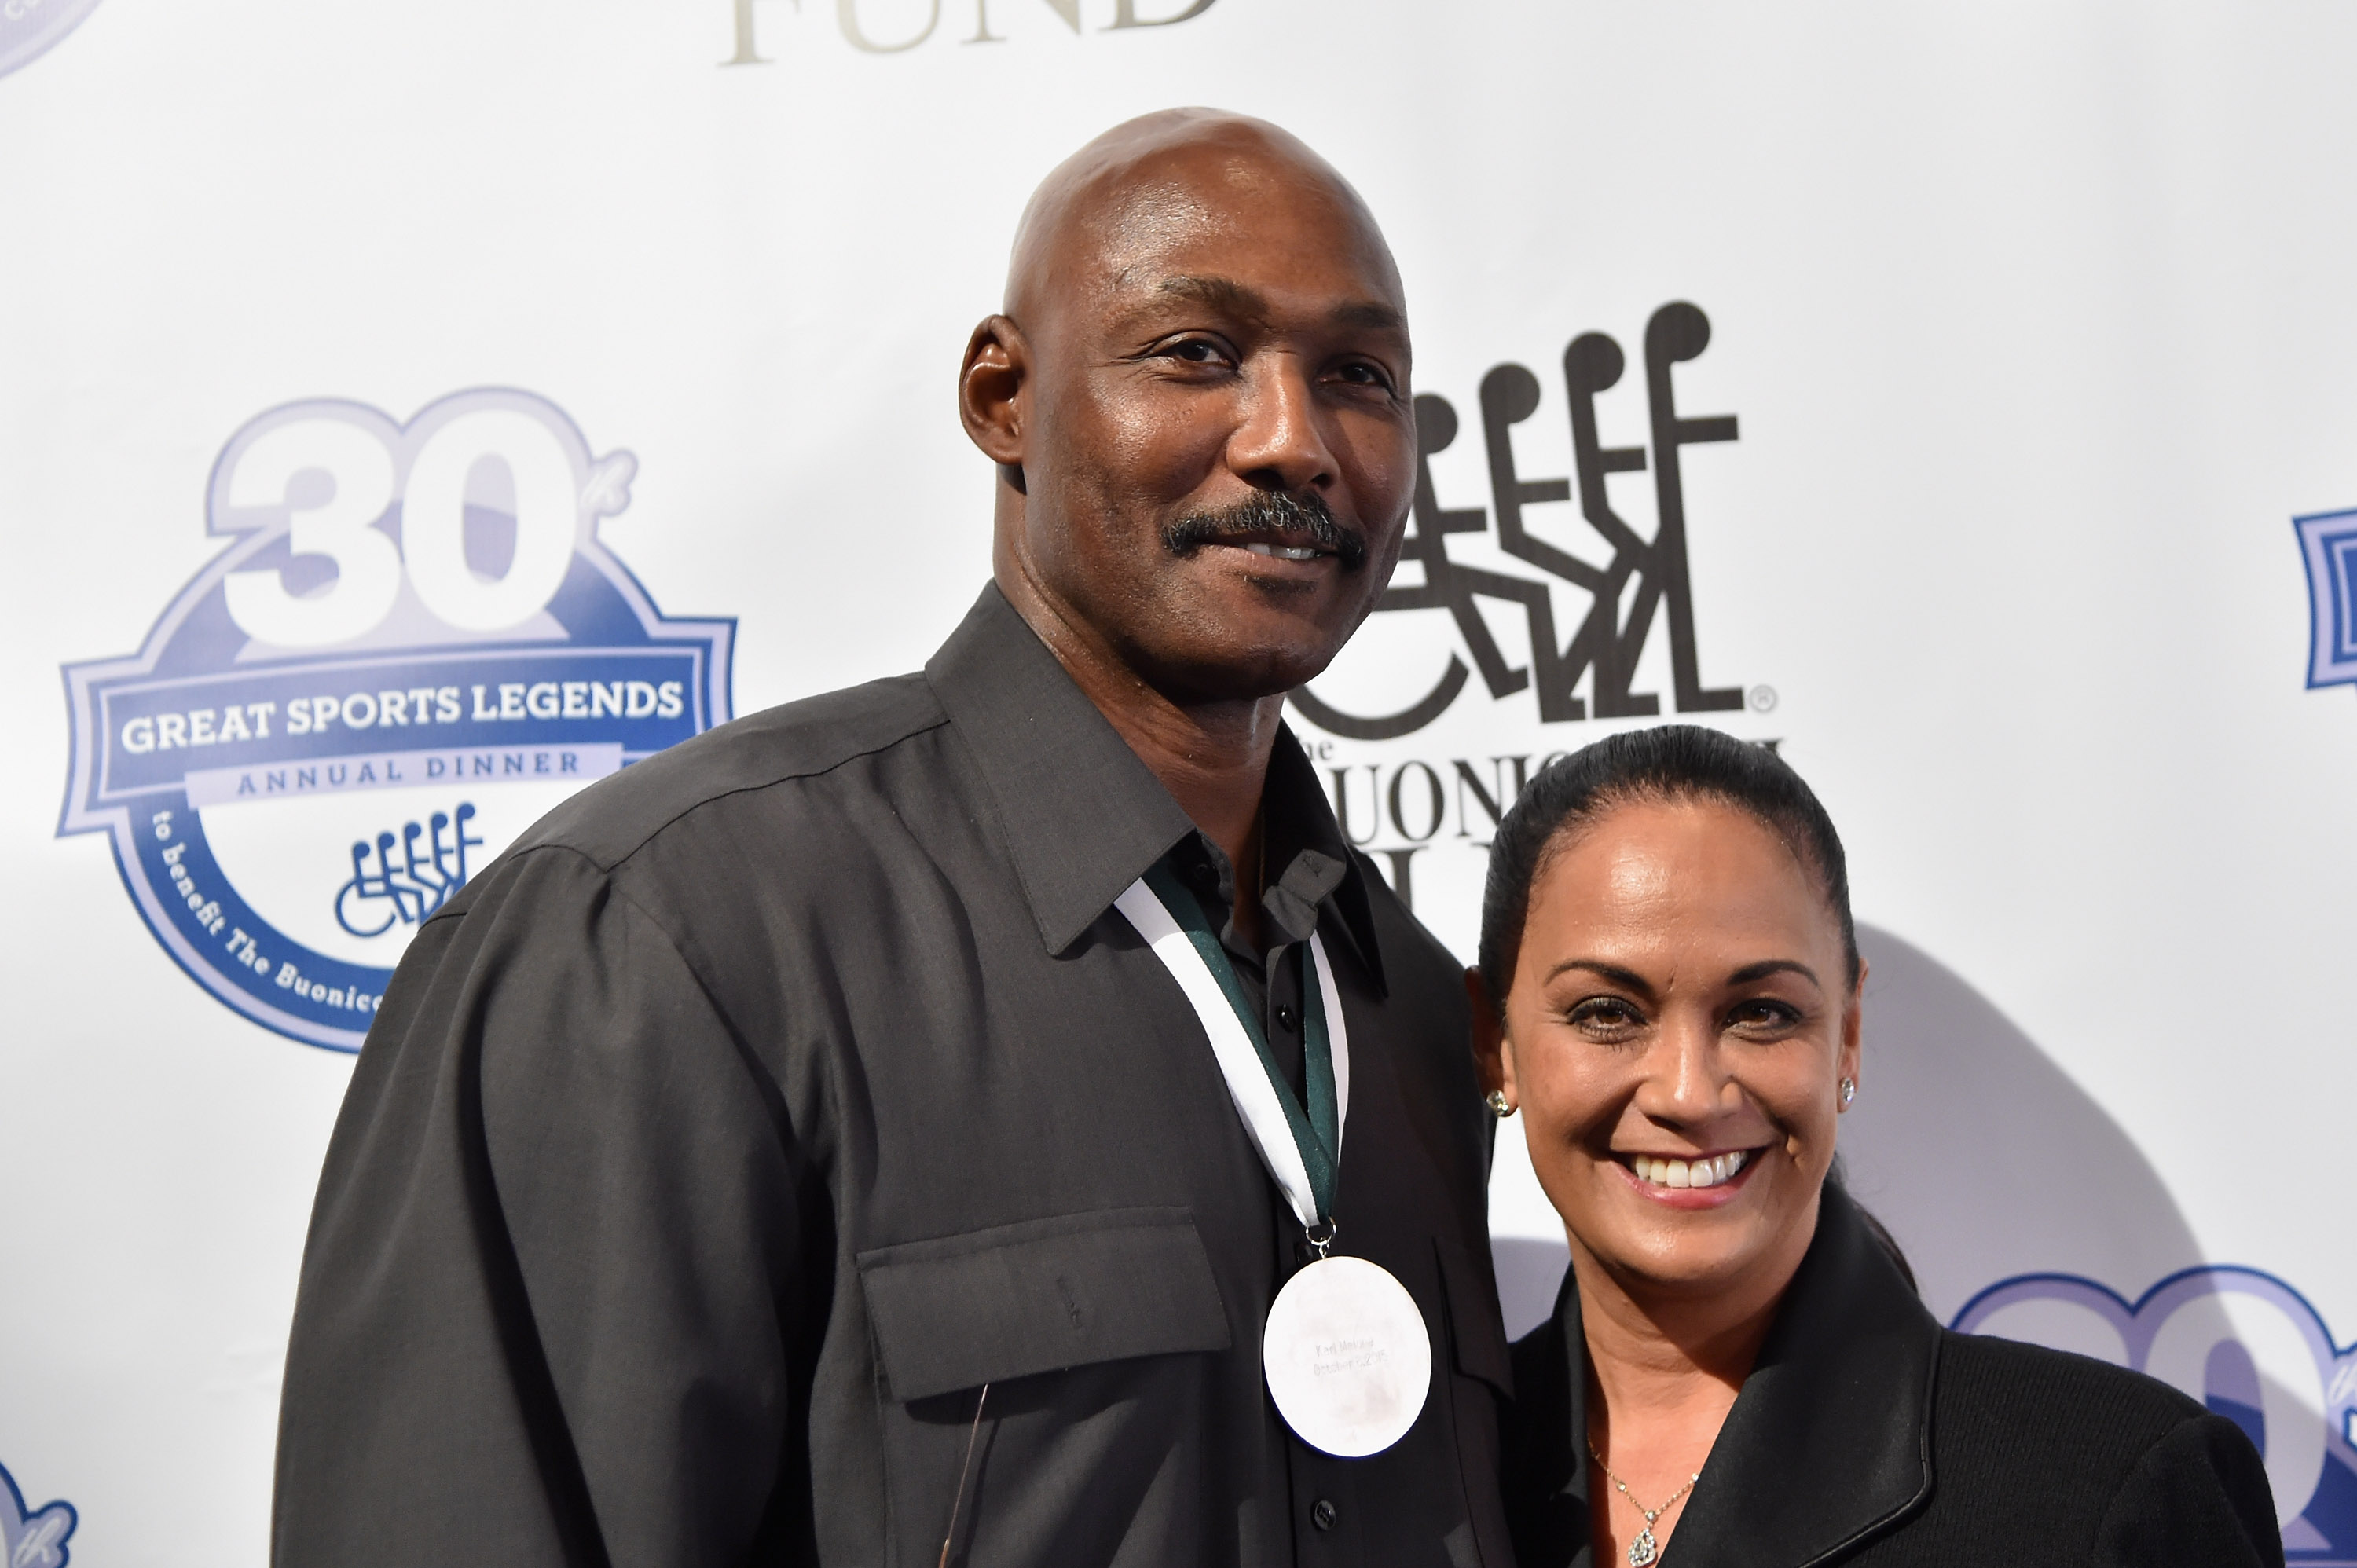 Karl Malone and his wife Kay Kinsey Malone at the 30th Annual Great Sports Legends Dinner on October 6, 2015, in New York City | Source: Getty Images